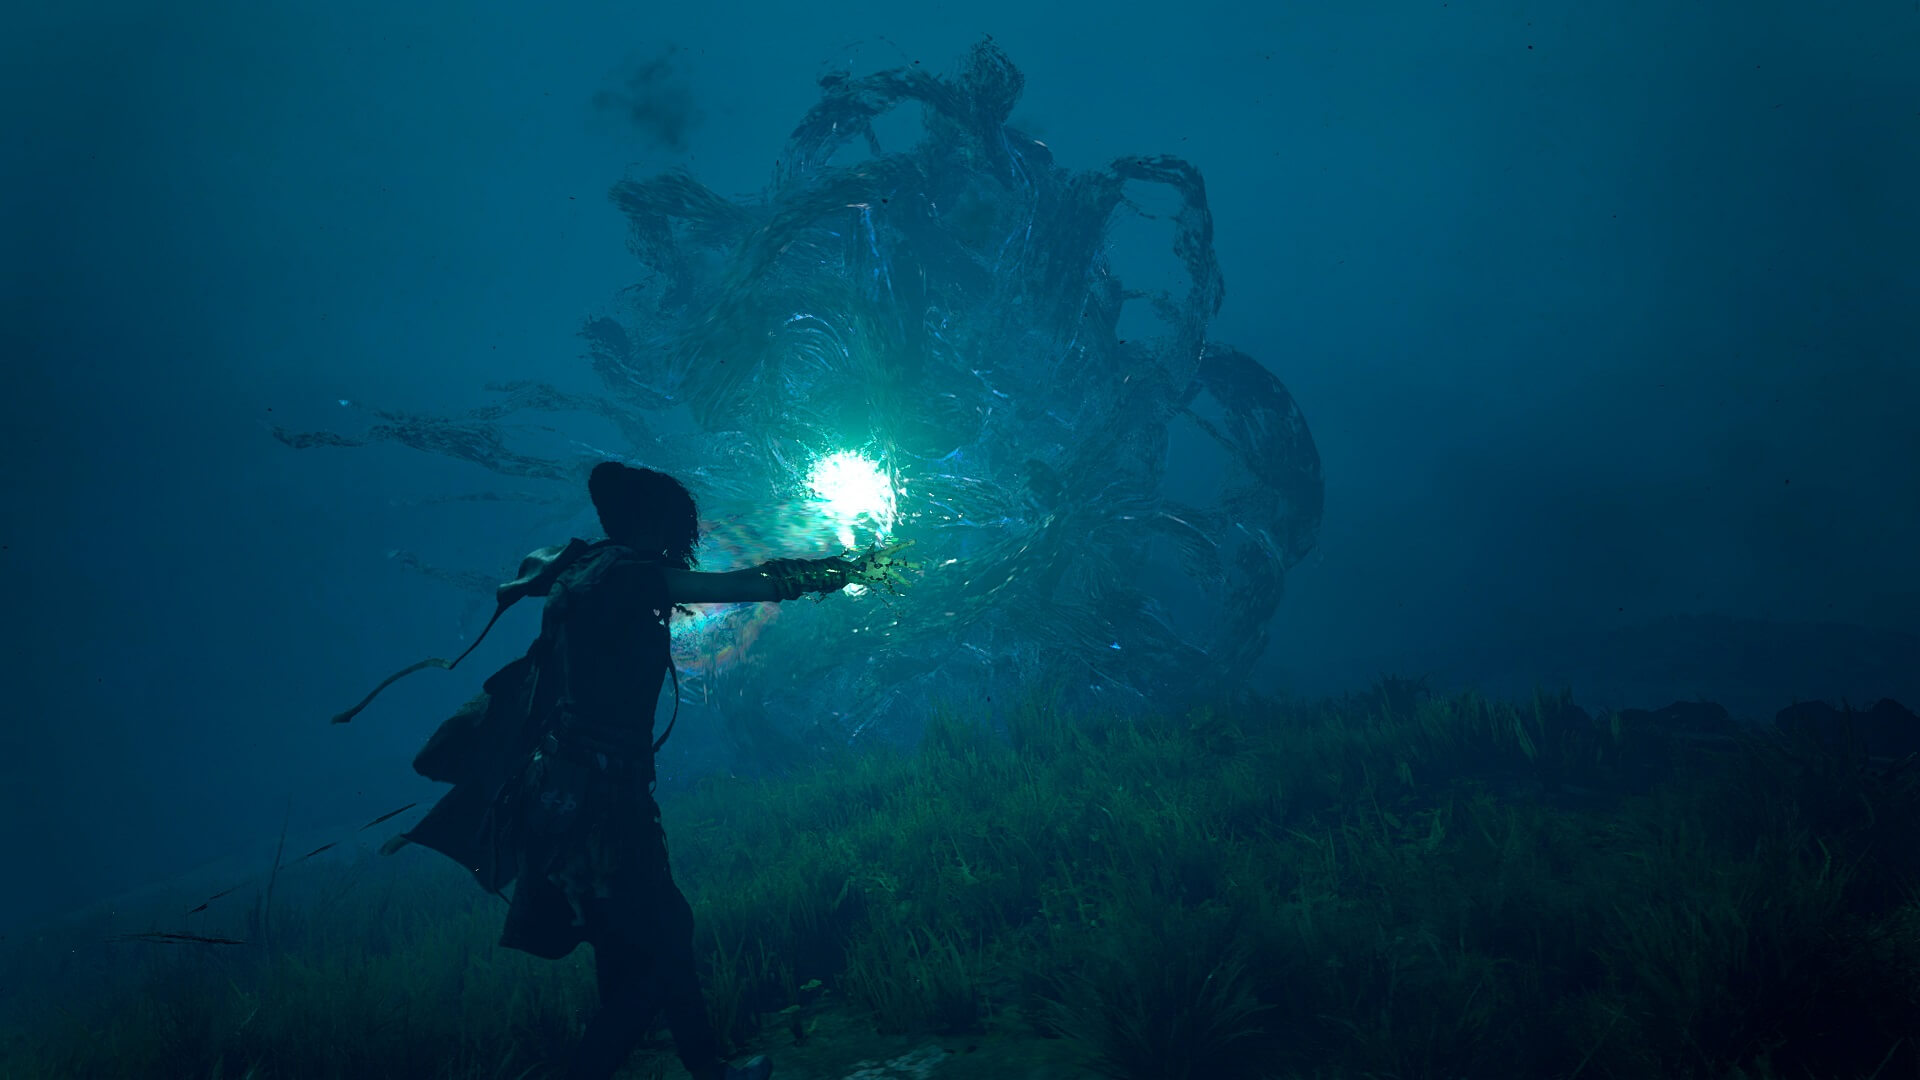 The player fighting a large eldritch monster with magic in Forspoken